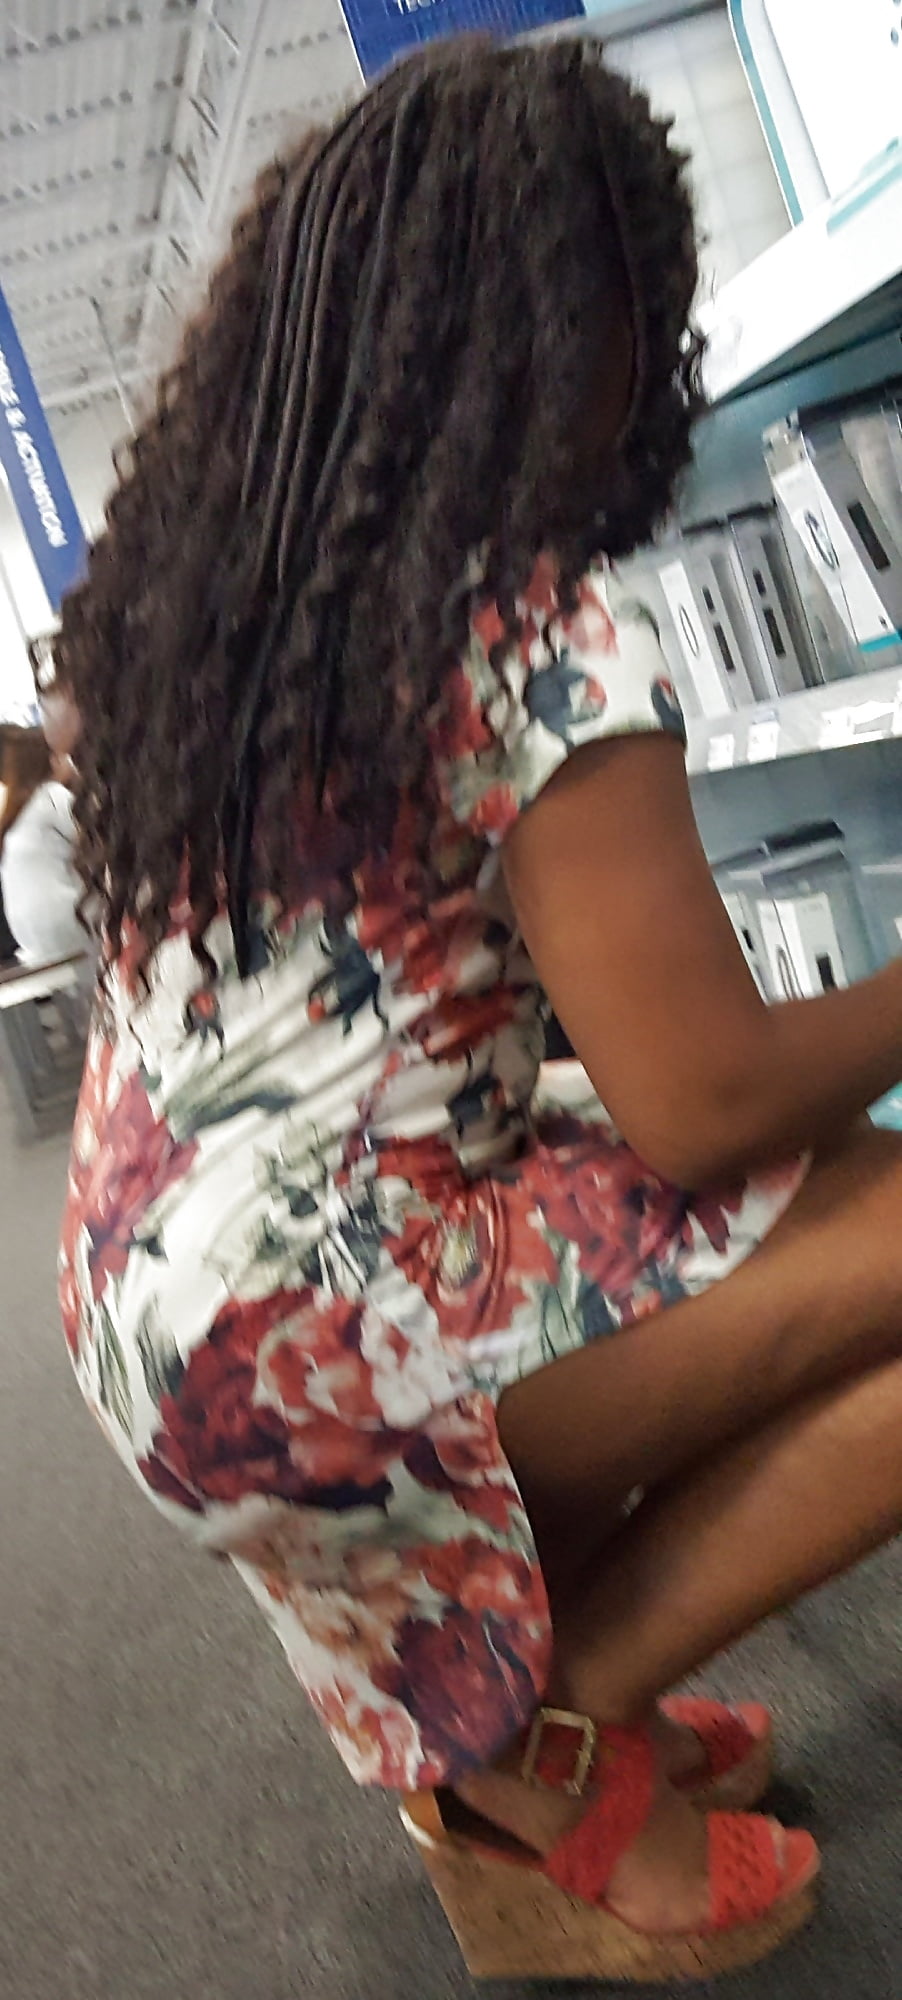 Ebony_wife_shopping_for_hubby_in_thot_dress_Creep_Shots (9/18)